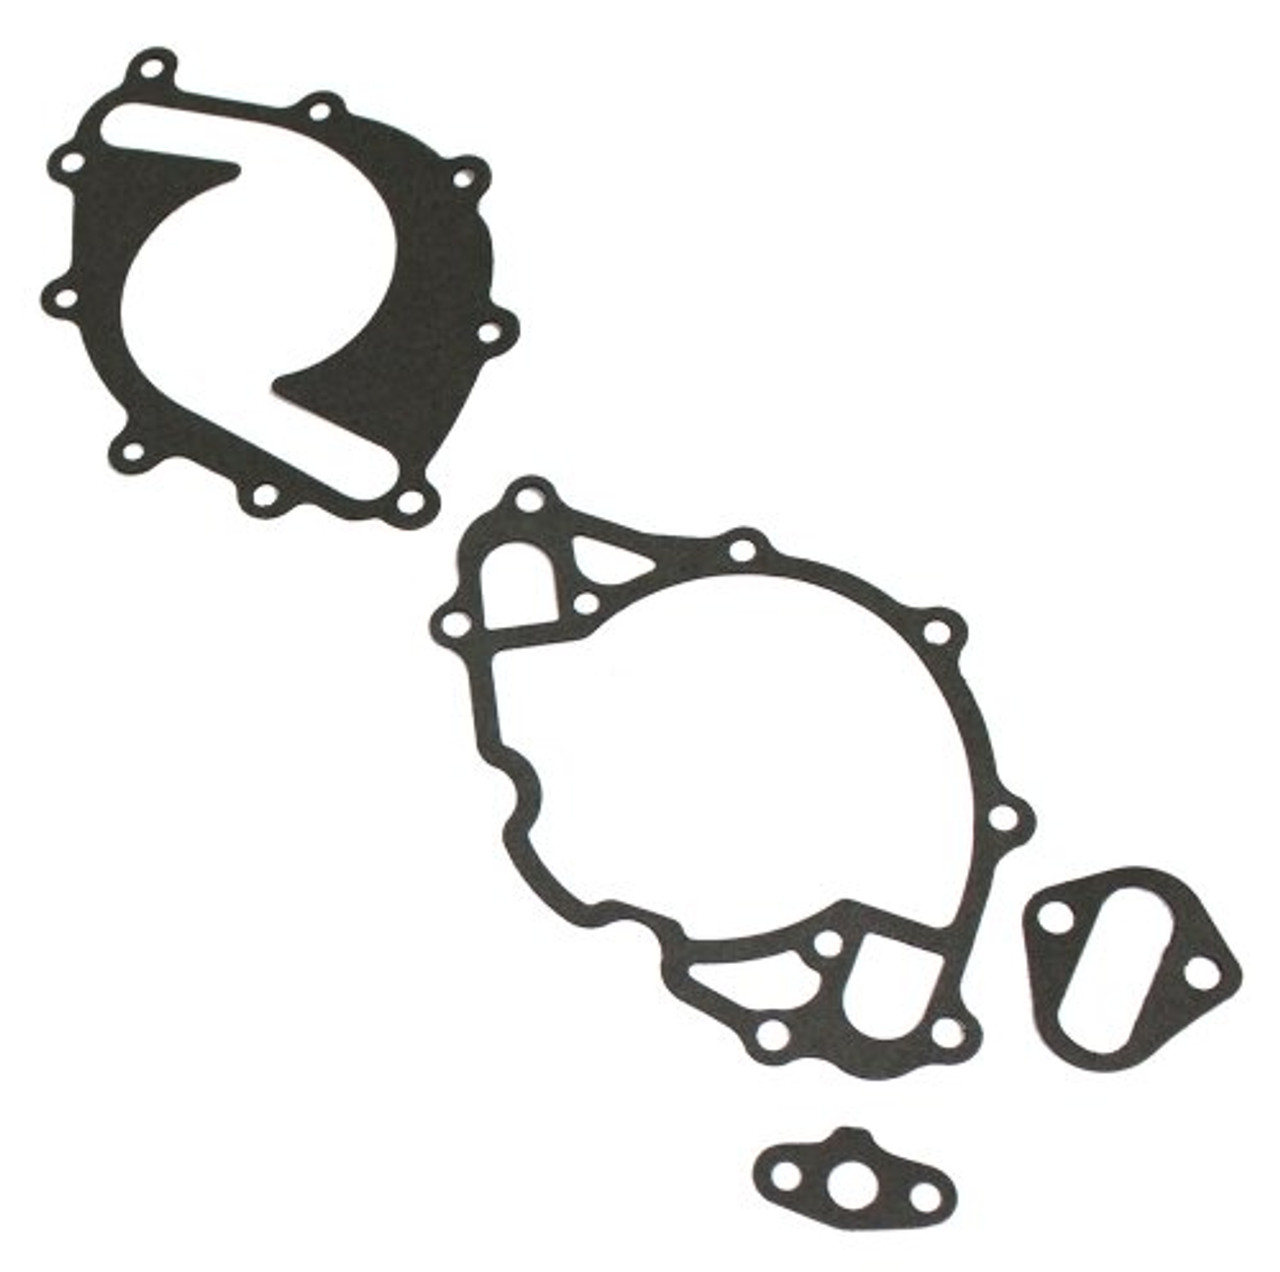 Lower Gasket Set - 1987 Ford Thunderbird 5.0L Engine Parts # LGS4113ZE96